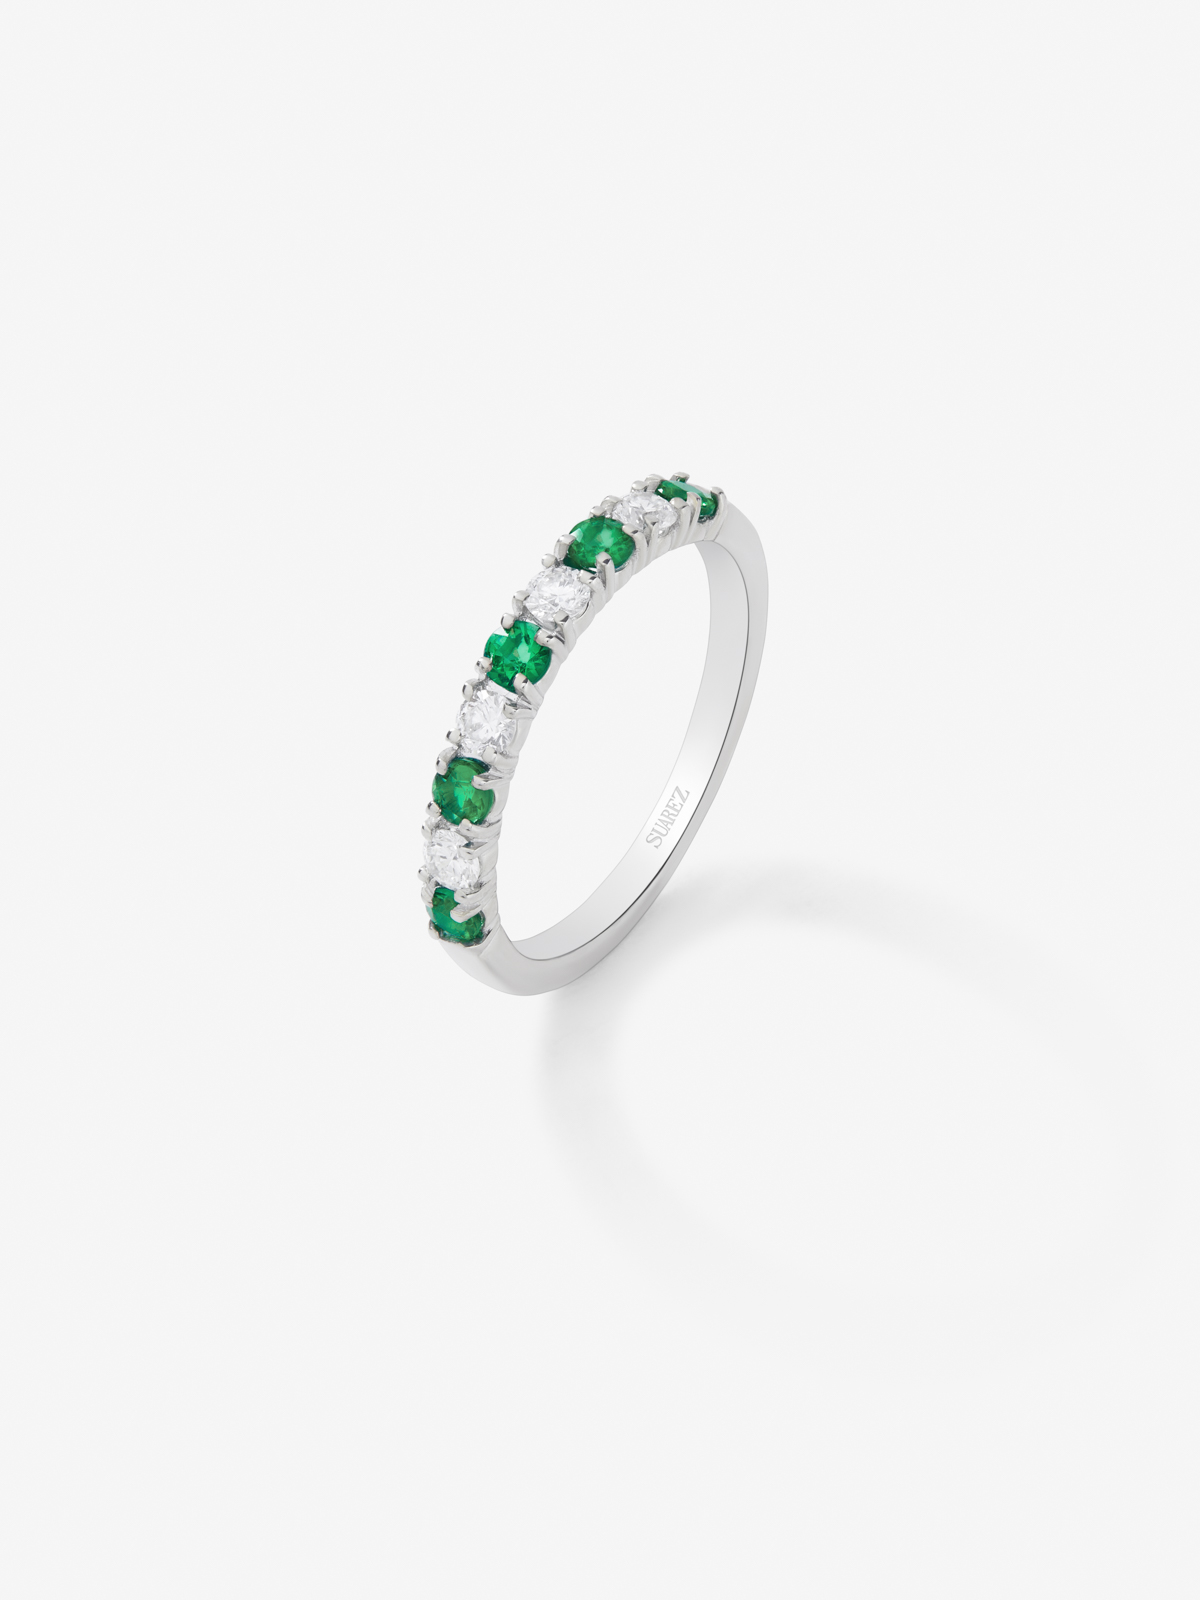 Half-eternity 18K gold ring with emerald and diamond